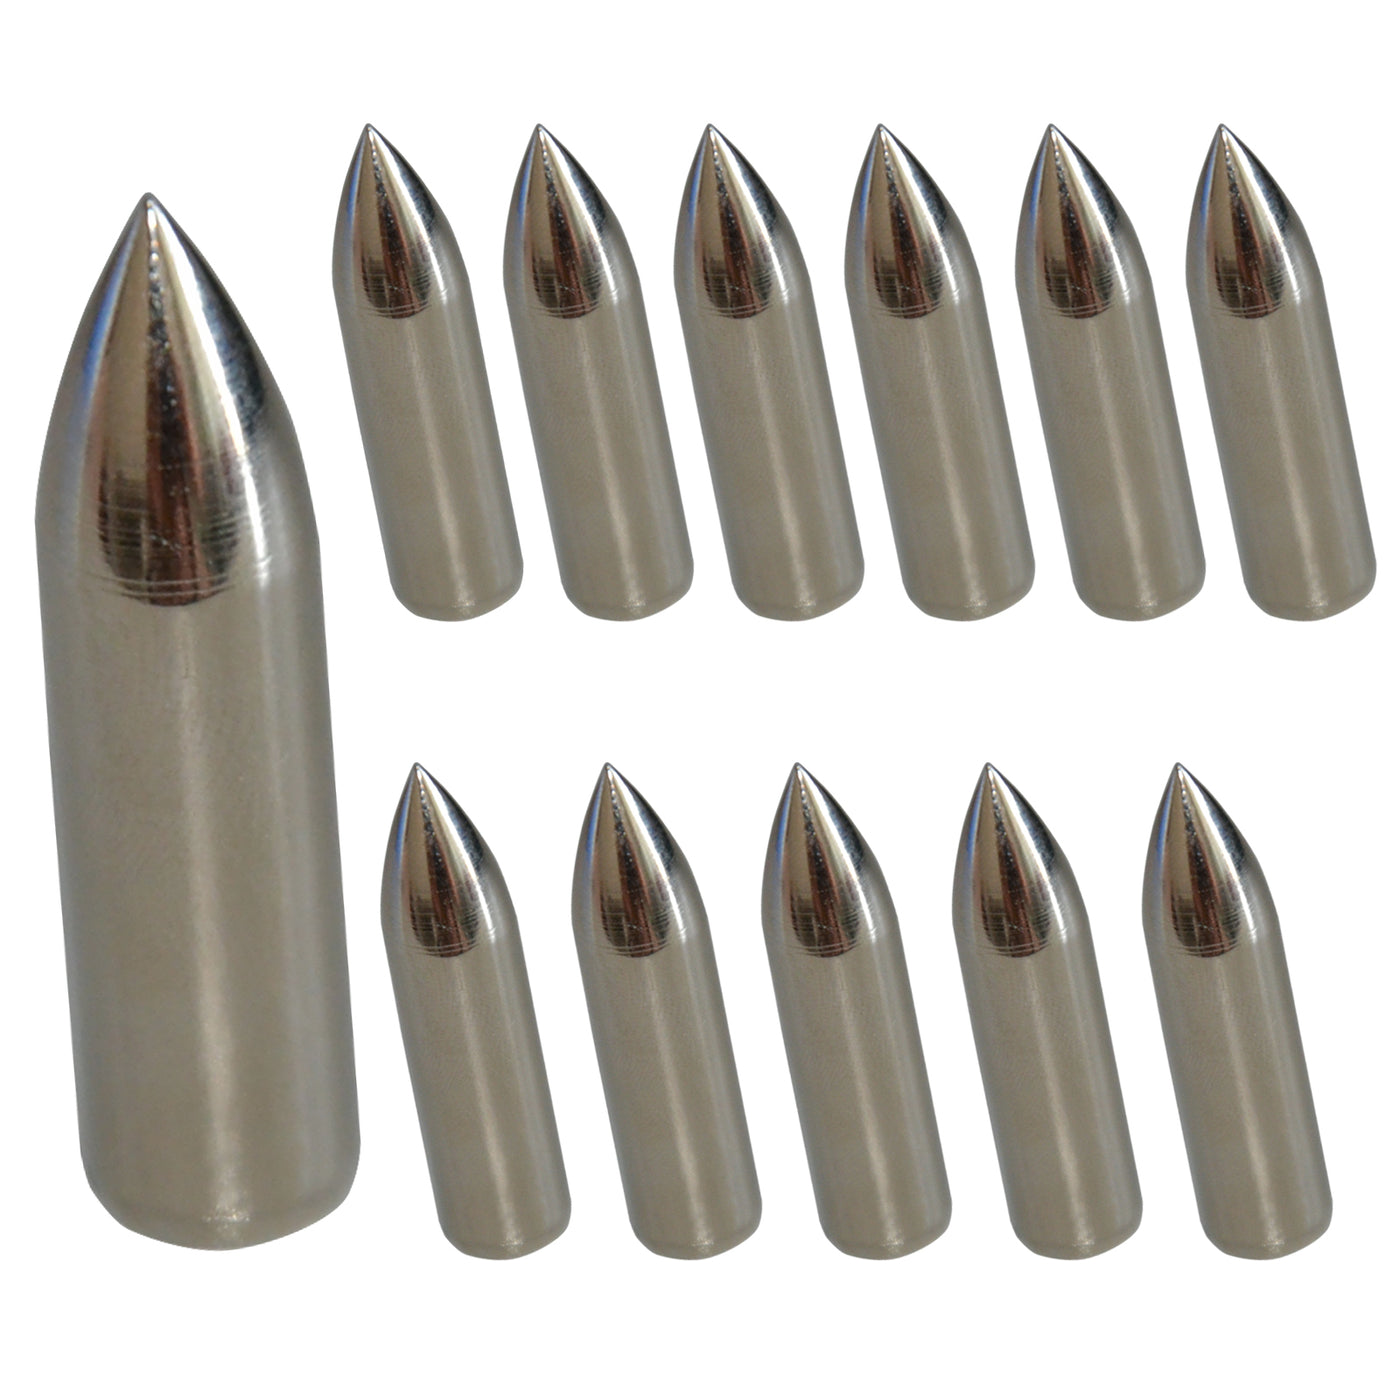 12x 92-grain ID-8mm OD-9mm Silver Glue-on Archery Field Points Blunt Tip for Practice Target